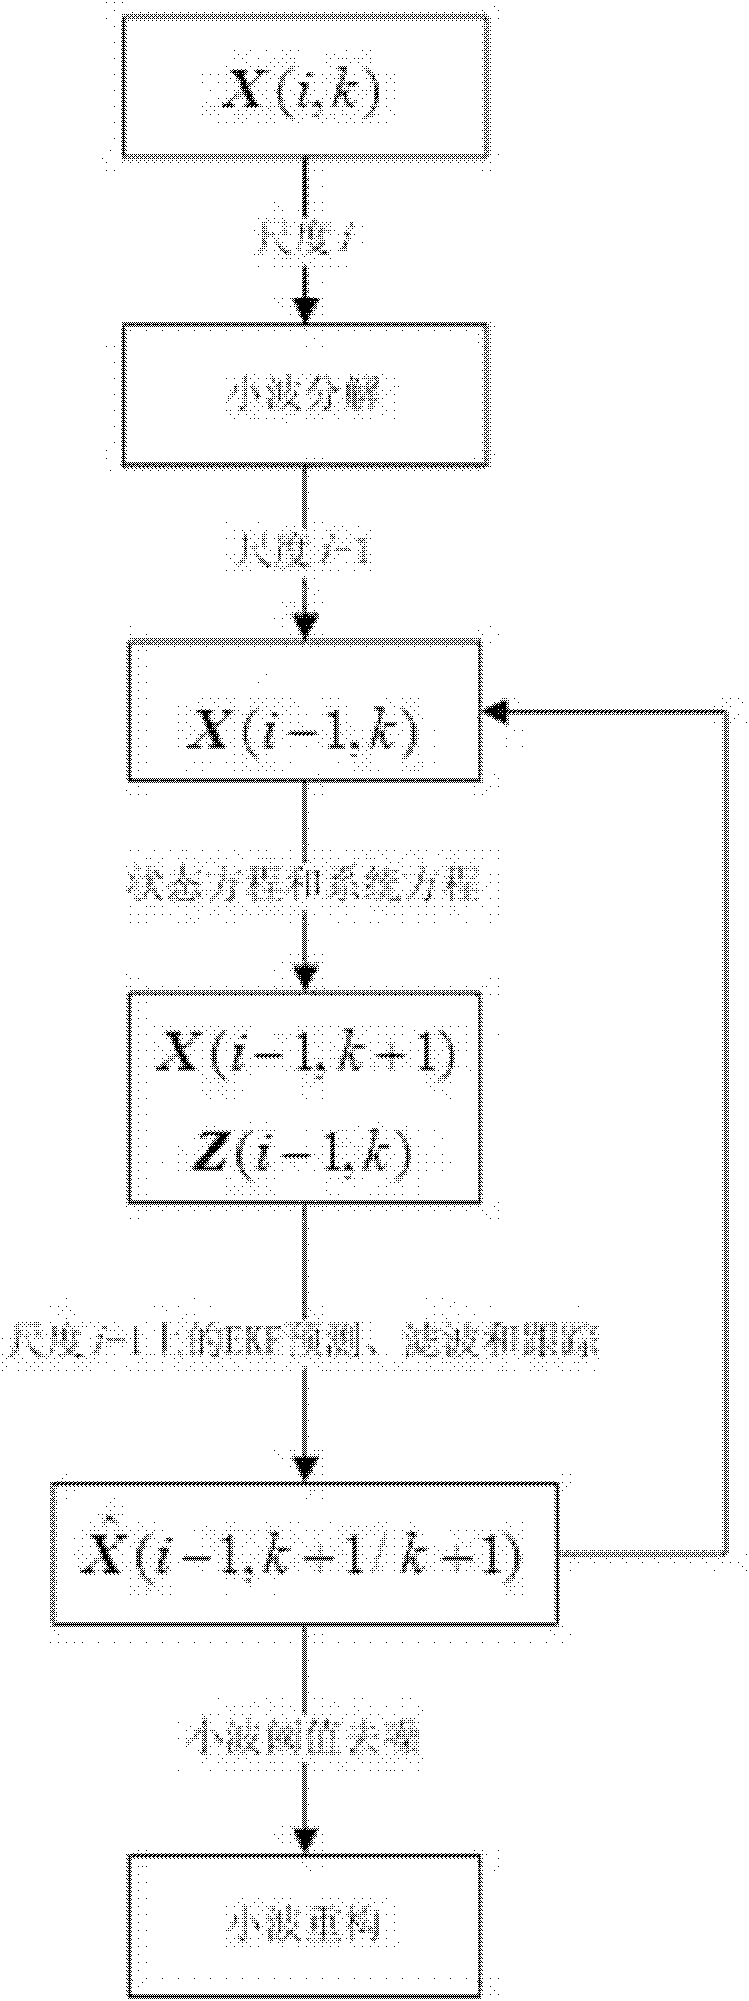 Target tracking method based on multi-scale dimensional decomposition